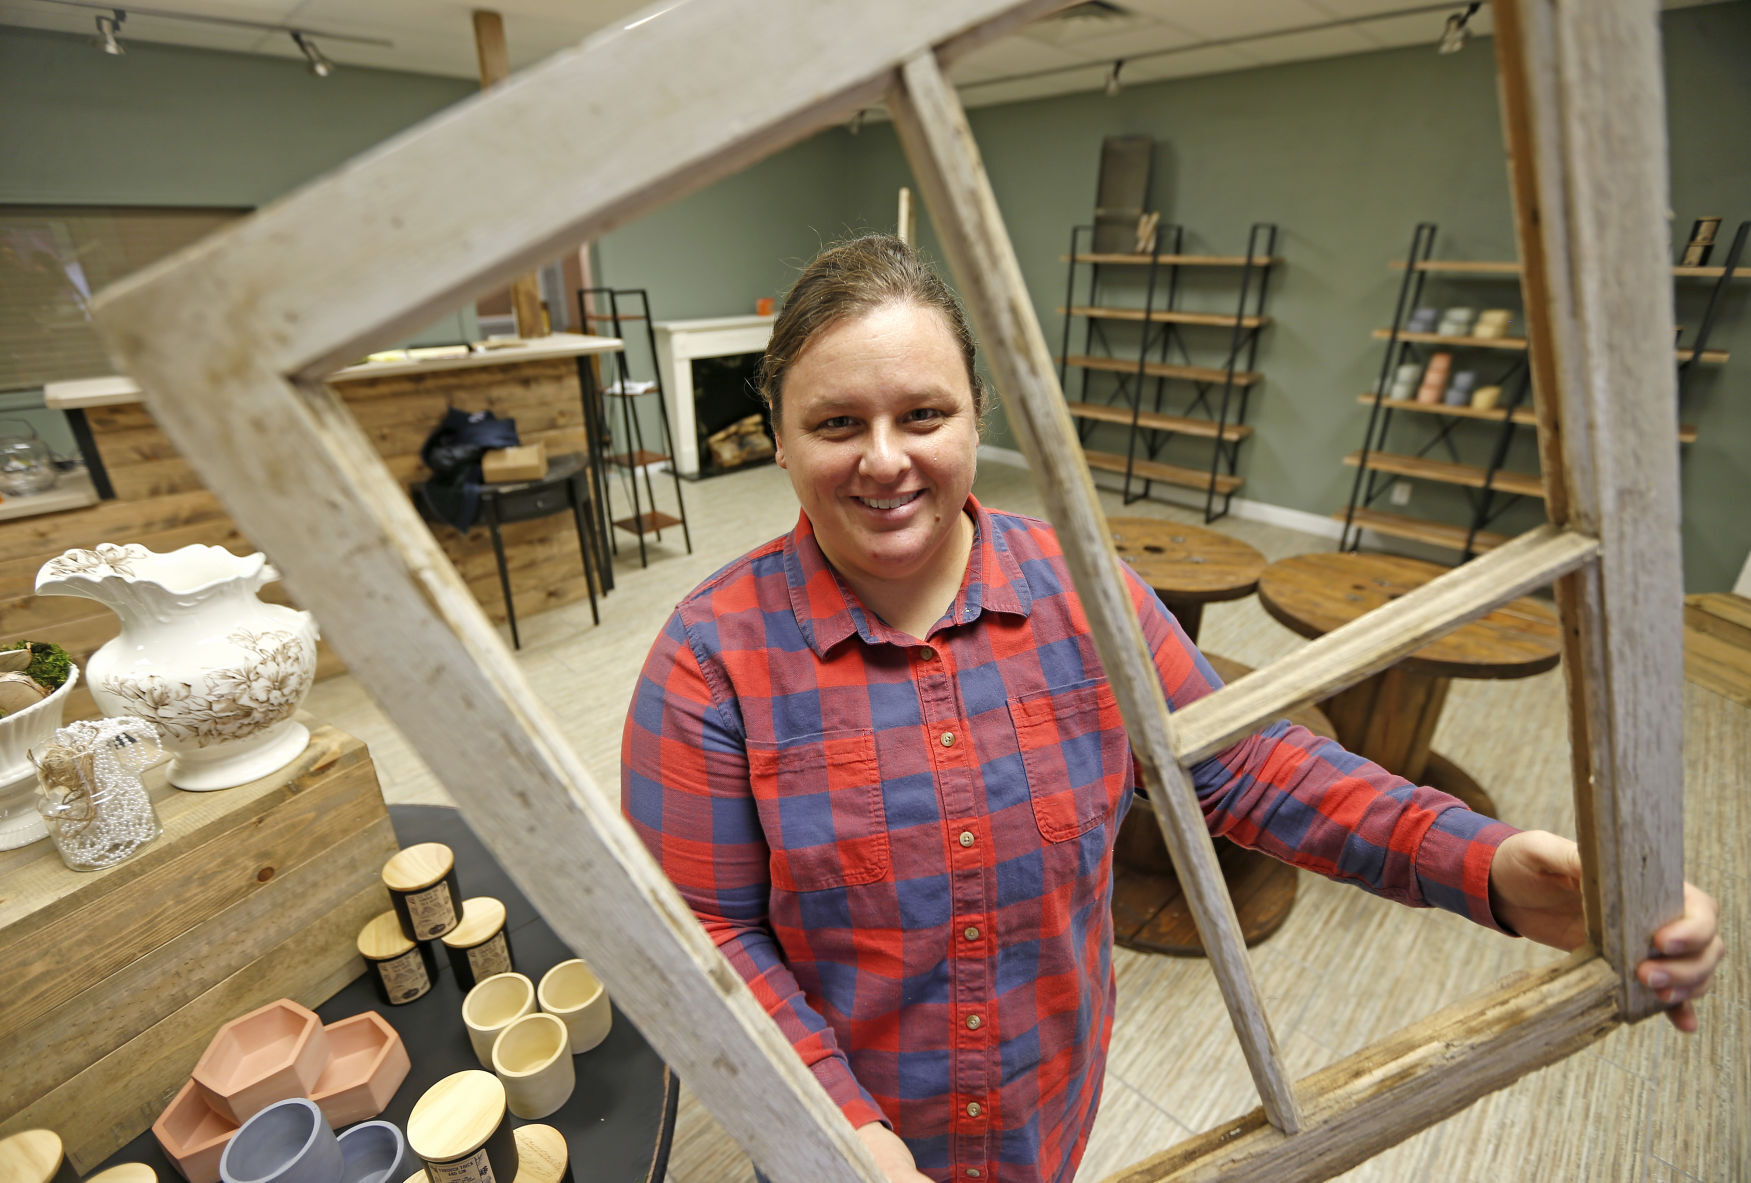 Katey Grund, owner of Dubuque Flower Company, will open her new store at 3340 Center Grove Drive in Dubuque.    PHOTO CREDIT: Dave Kettering